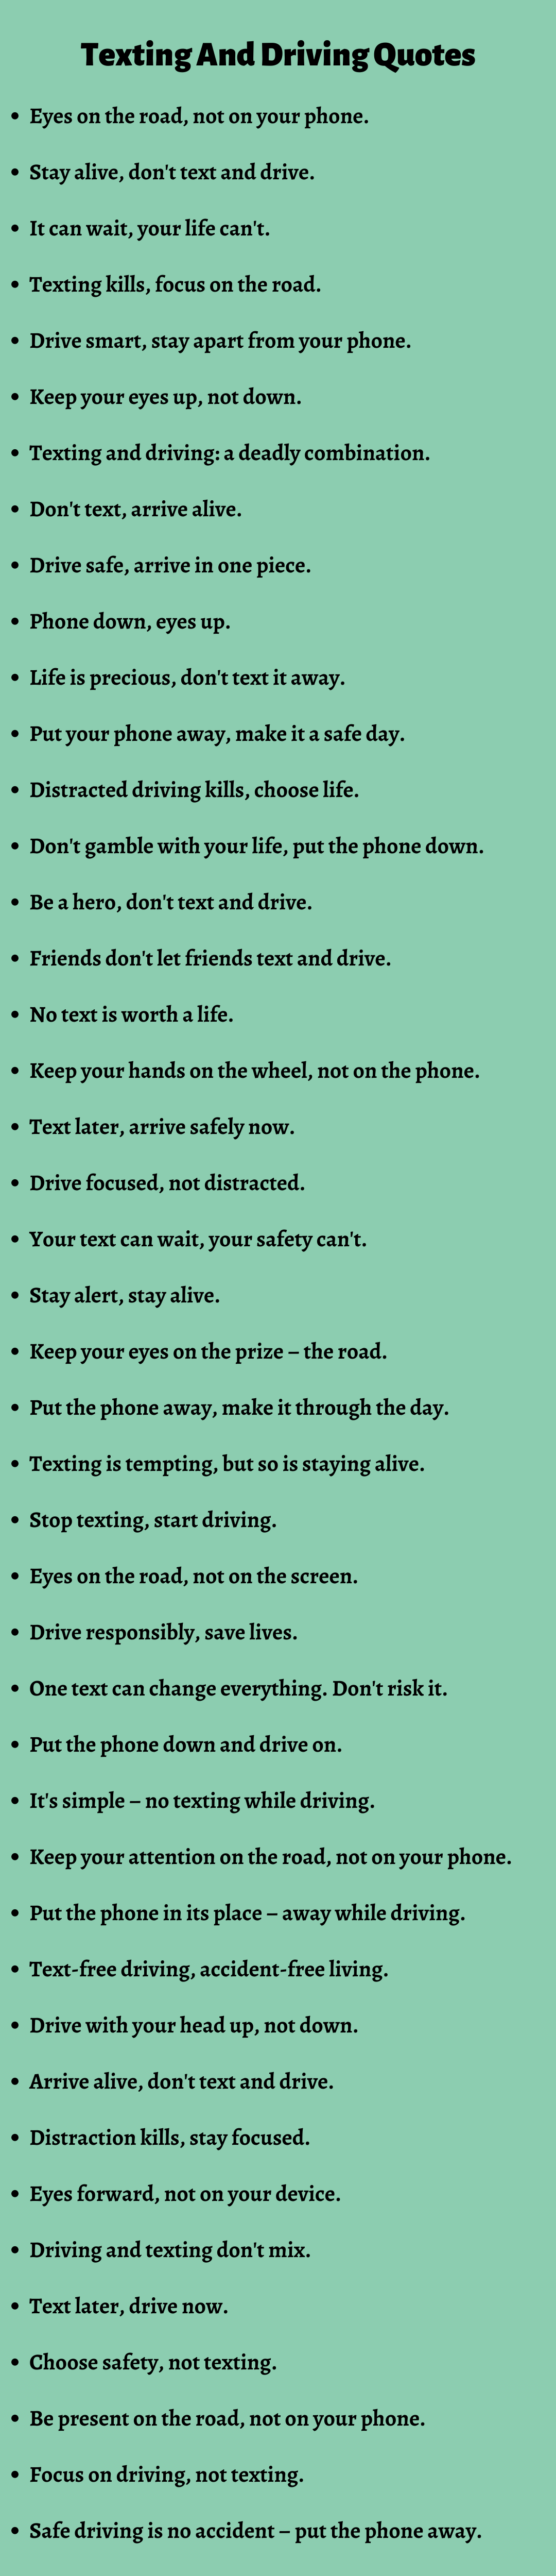 470 Texting and Driving Slogans and Quotes